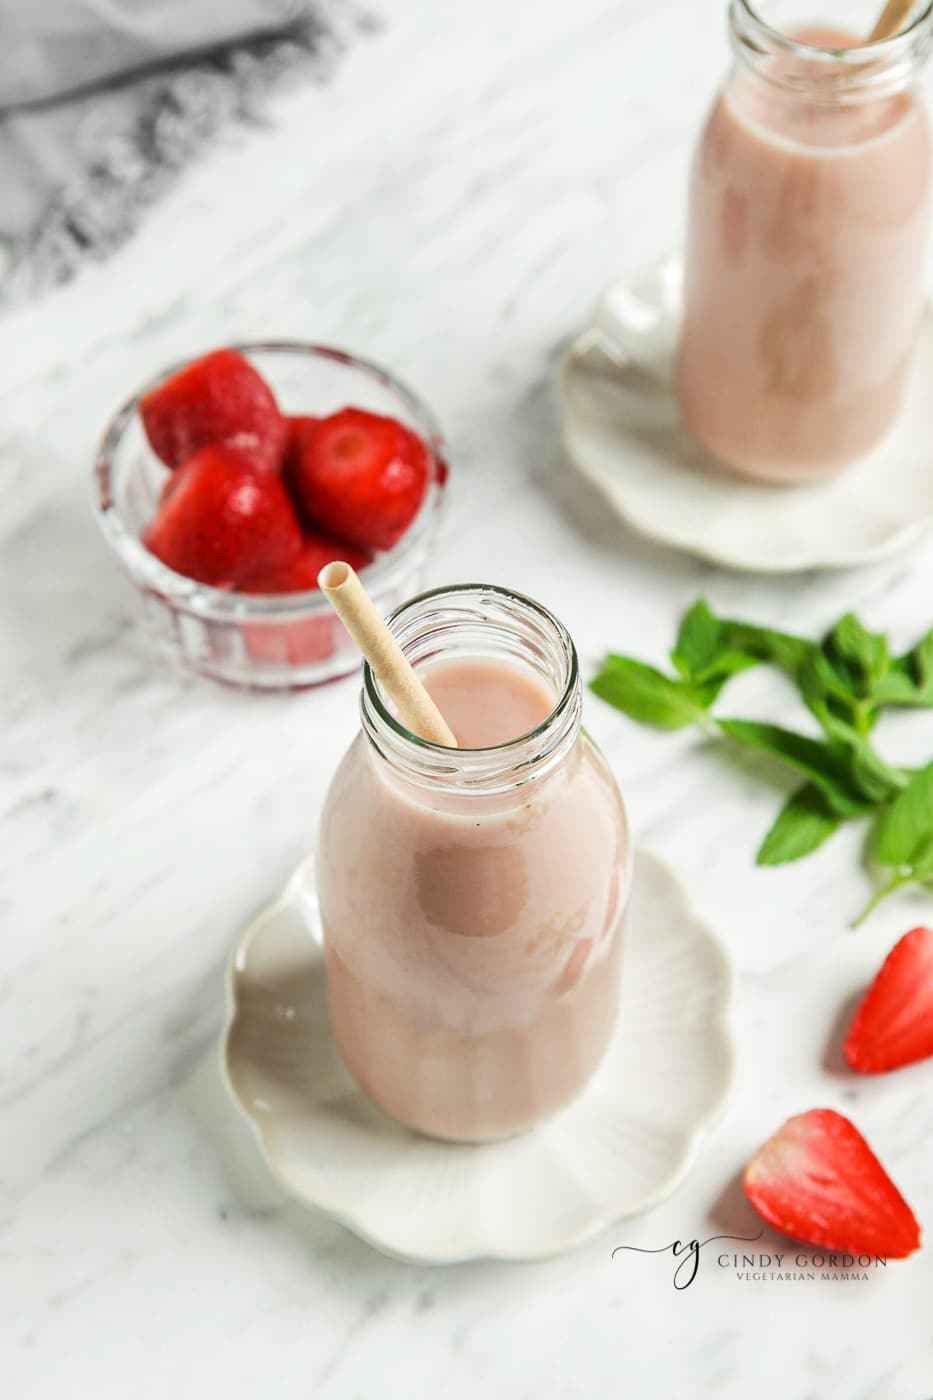 Overhead shot of creamy almond milk with strawberries in a glass bottle with a straw